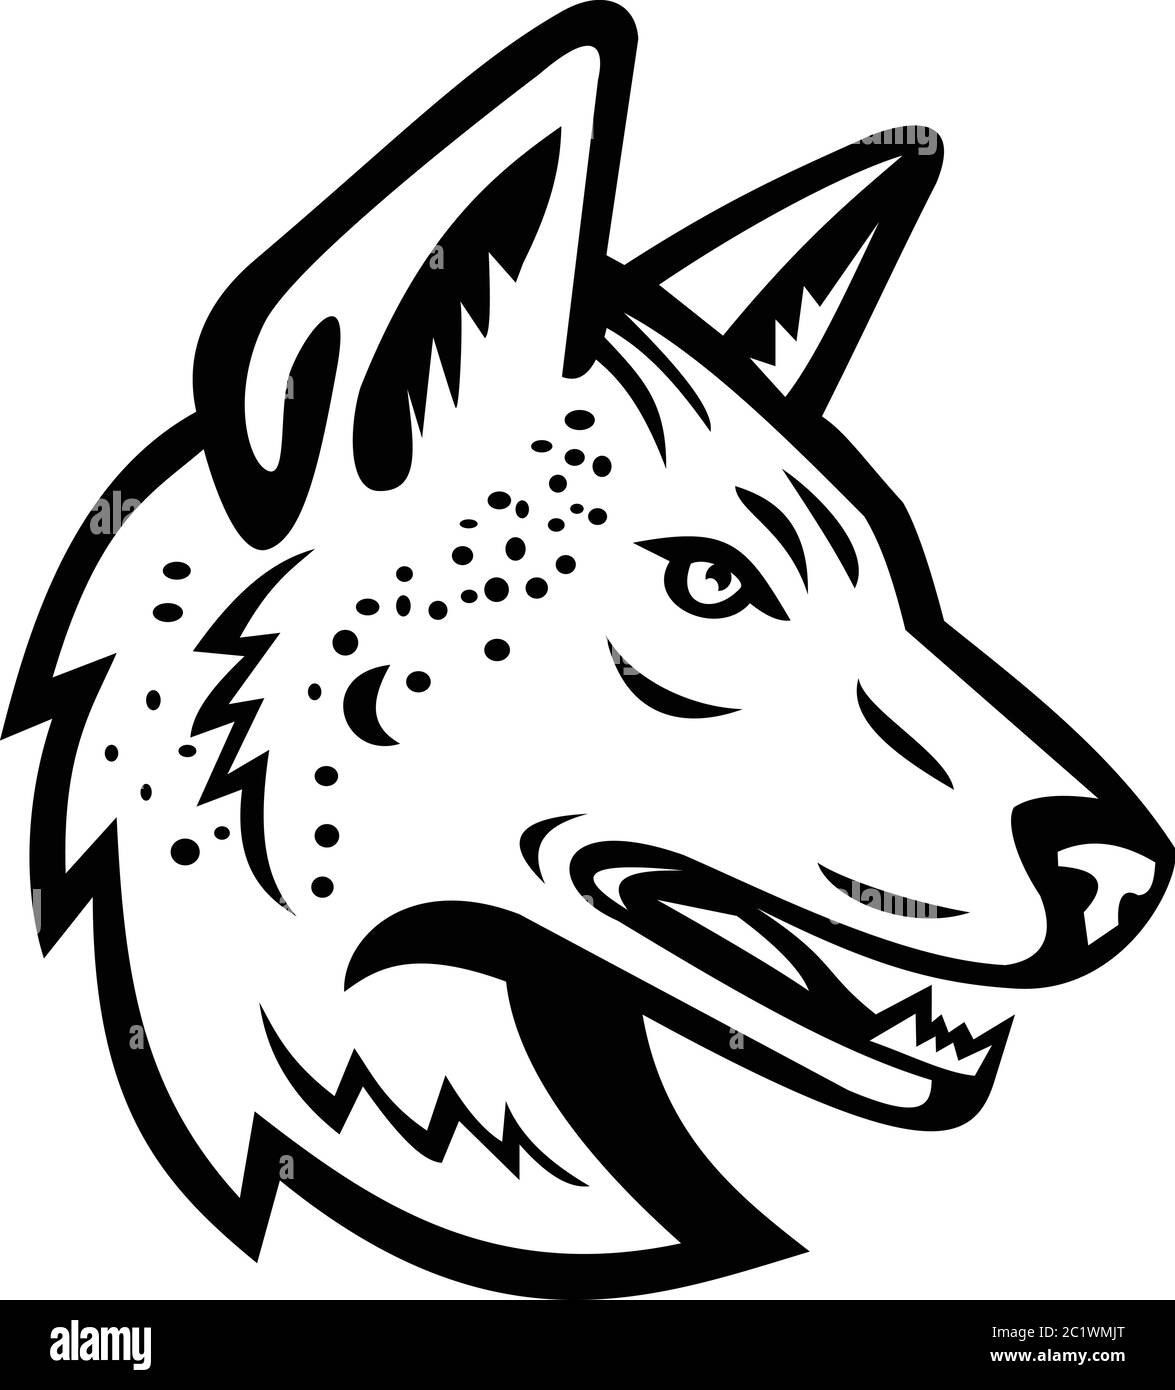 Black and white mascot illustration of head of an Arabian wolf or Canis lupus arabs, a subspecies of gray wolf viewed from side on isolated background Stock Vector